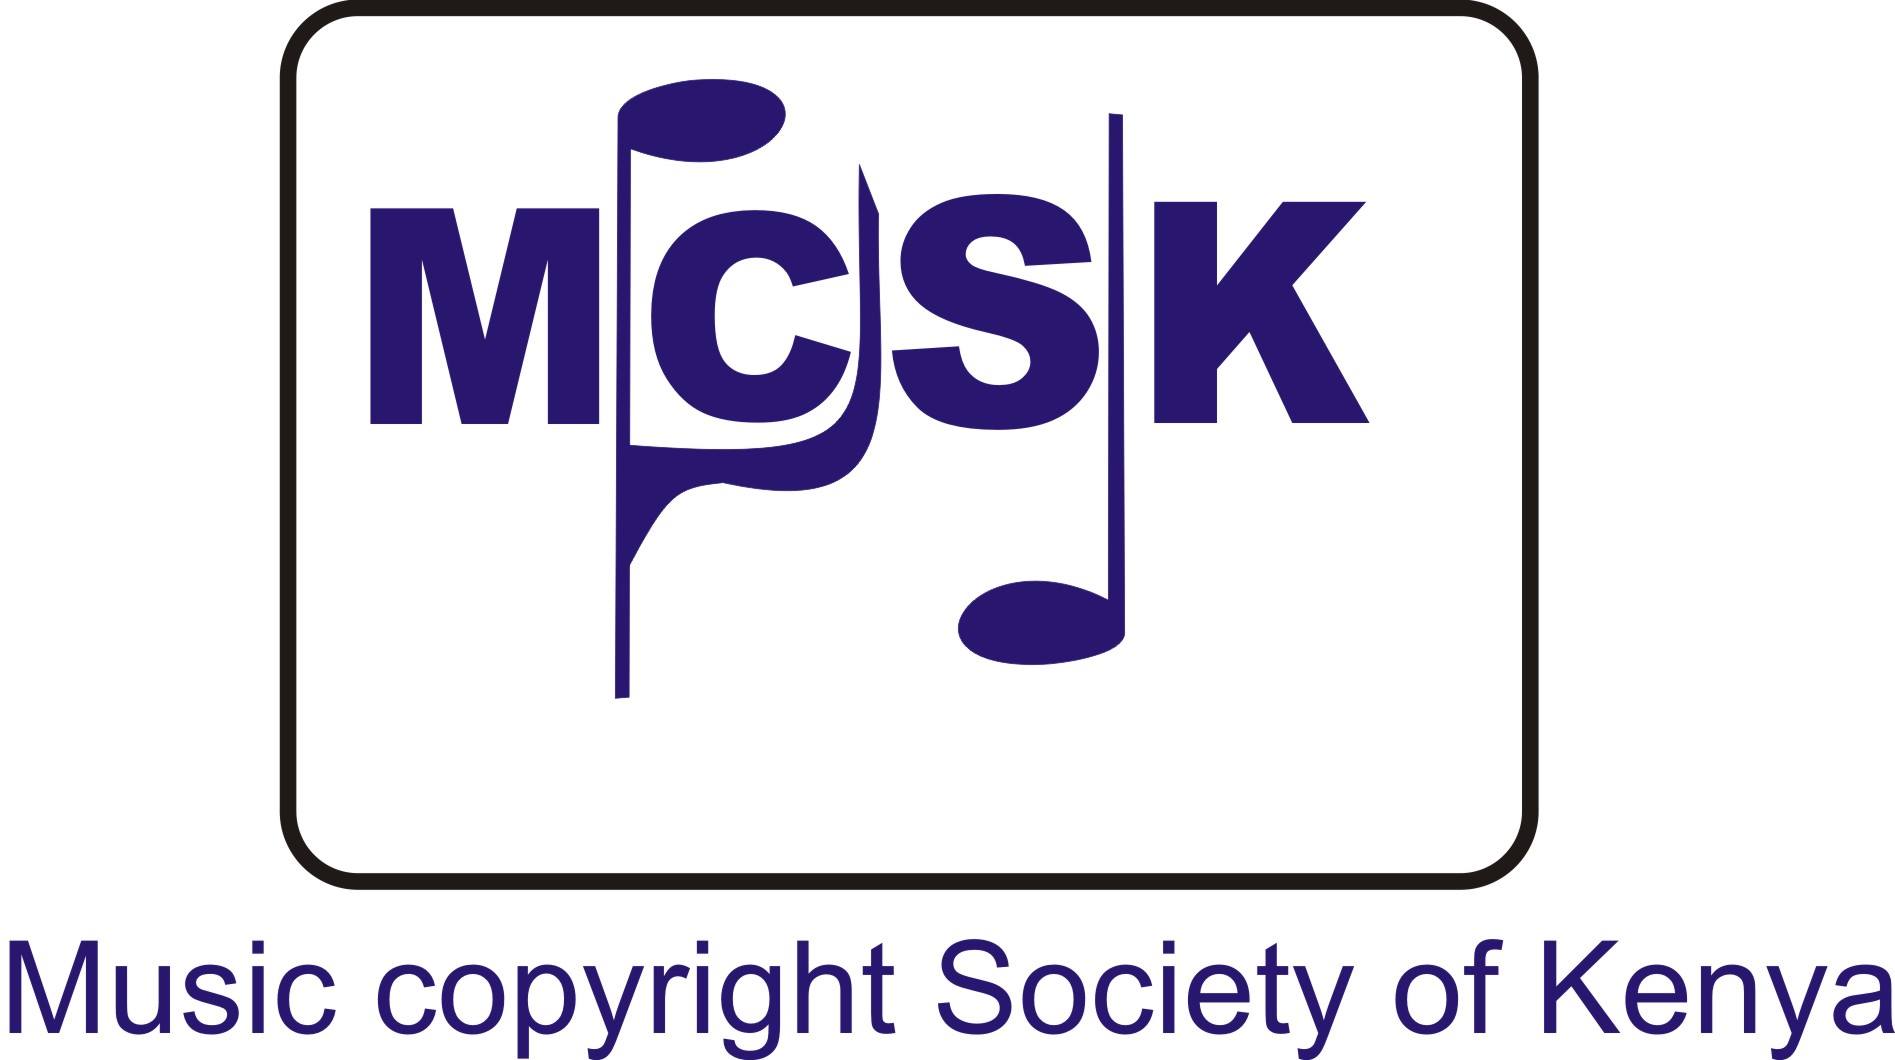 Exclusive: Kenya Music Copyright Society (MCSK) NO MORE! This is how they dug their own grave